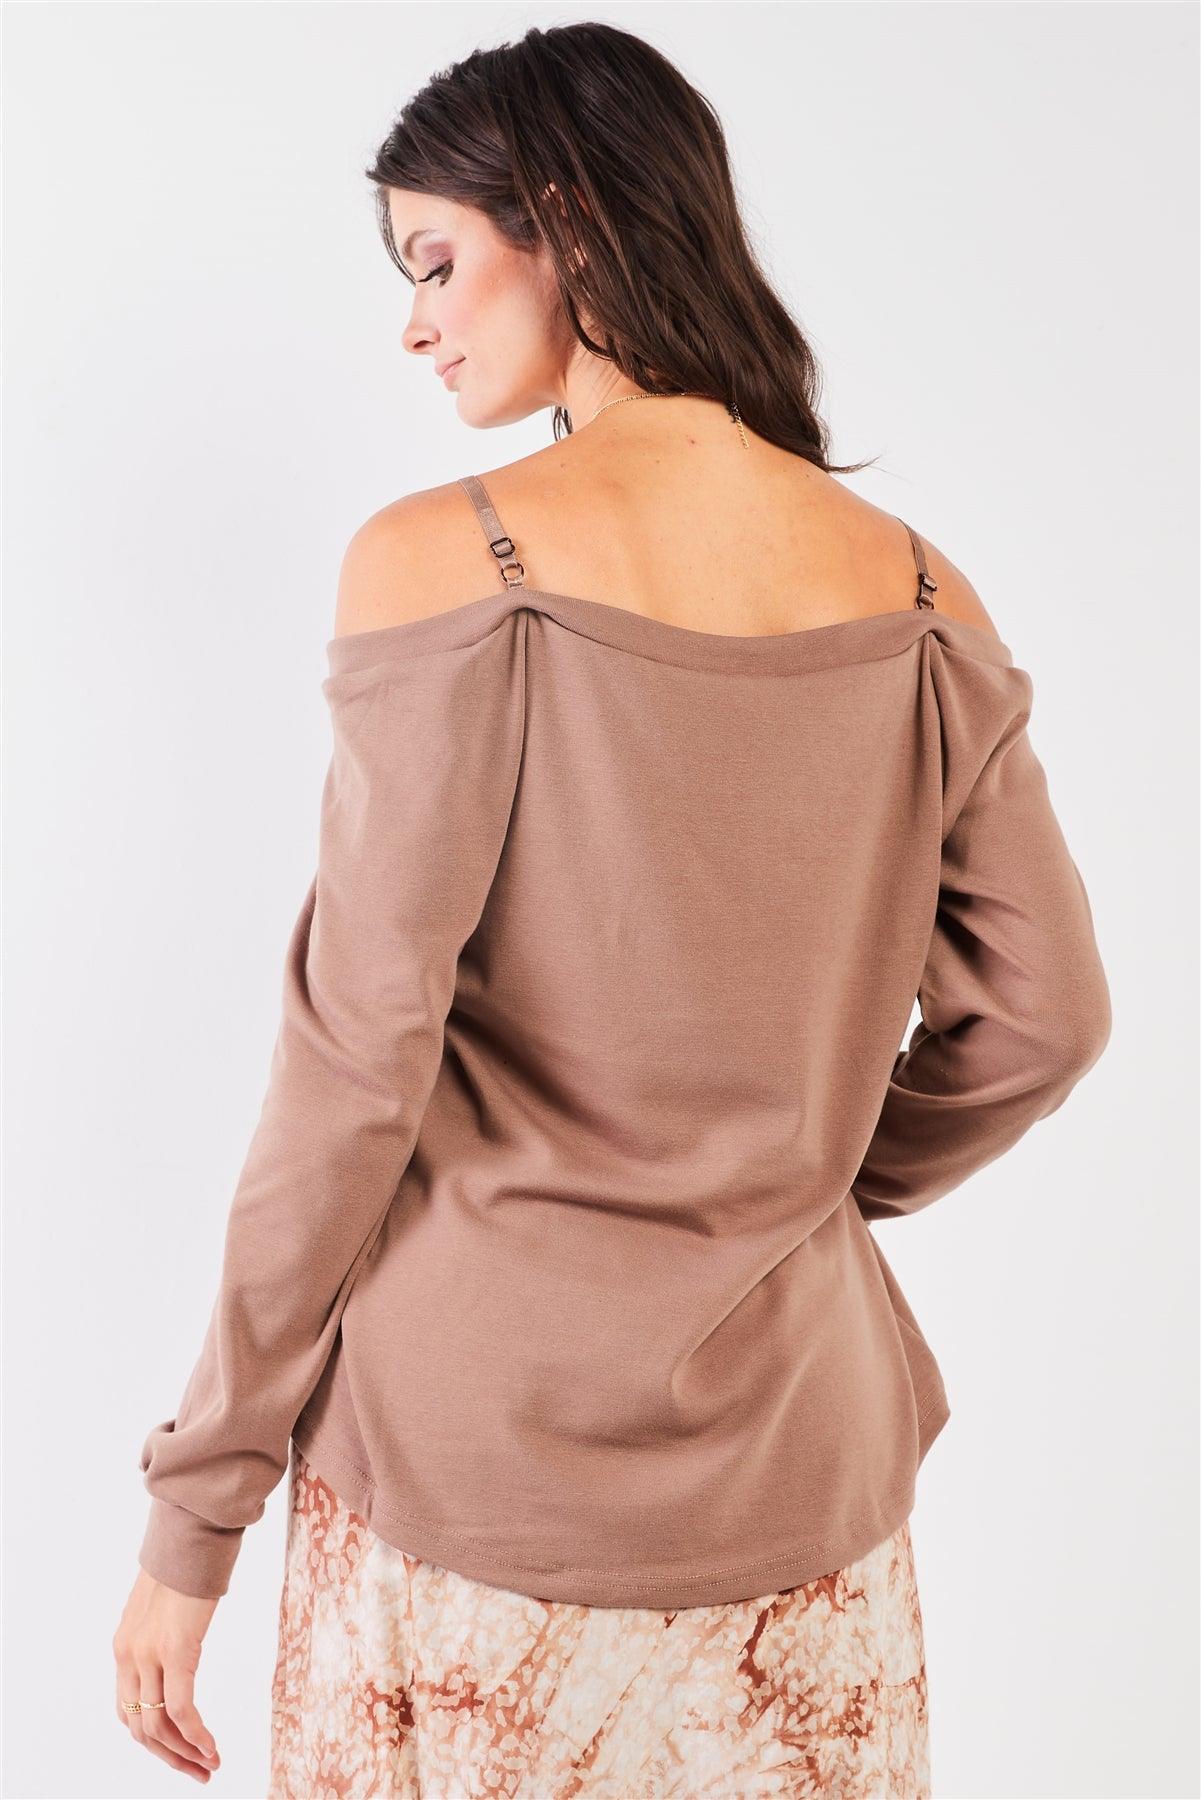 Mocha Off-The-Shoulder Lace Trim Long Sleeve Sweetheart Neck Relaxed Top